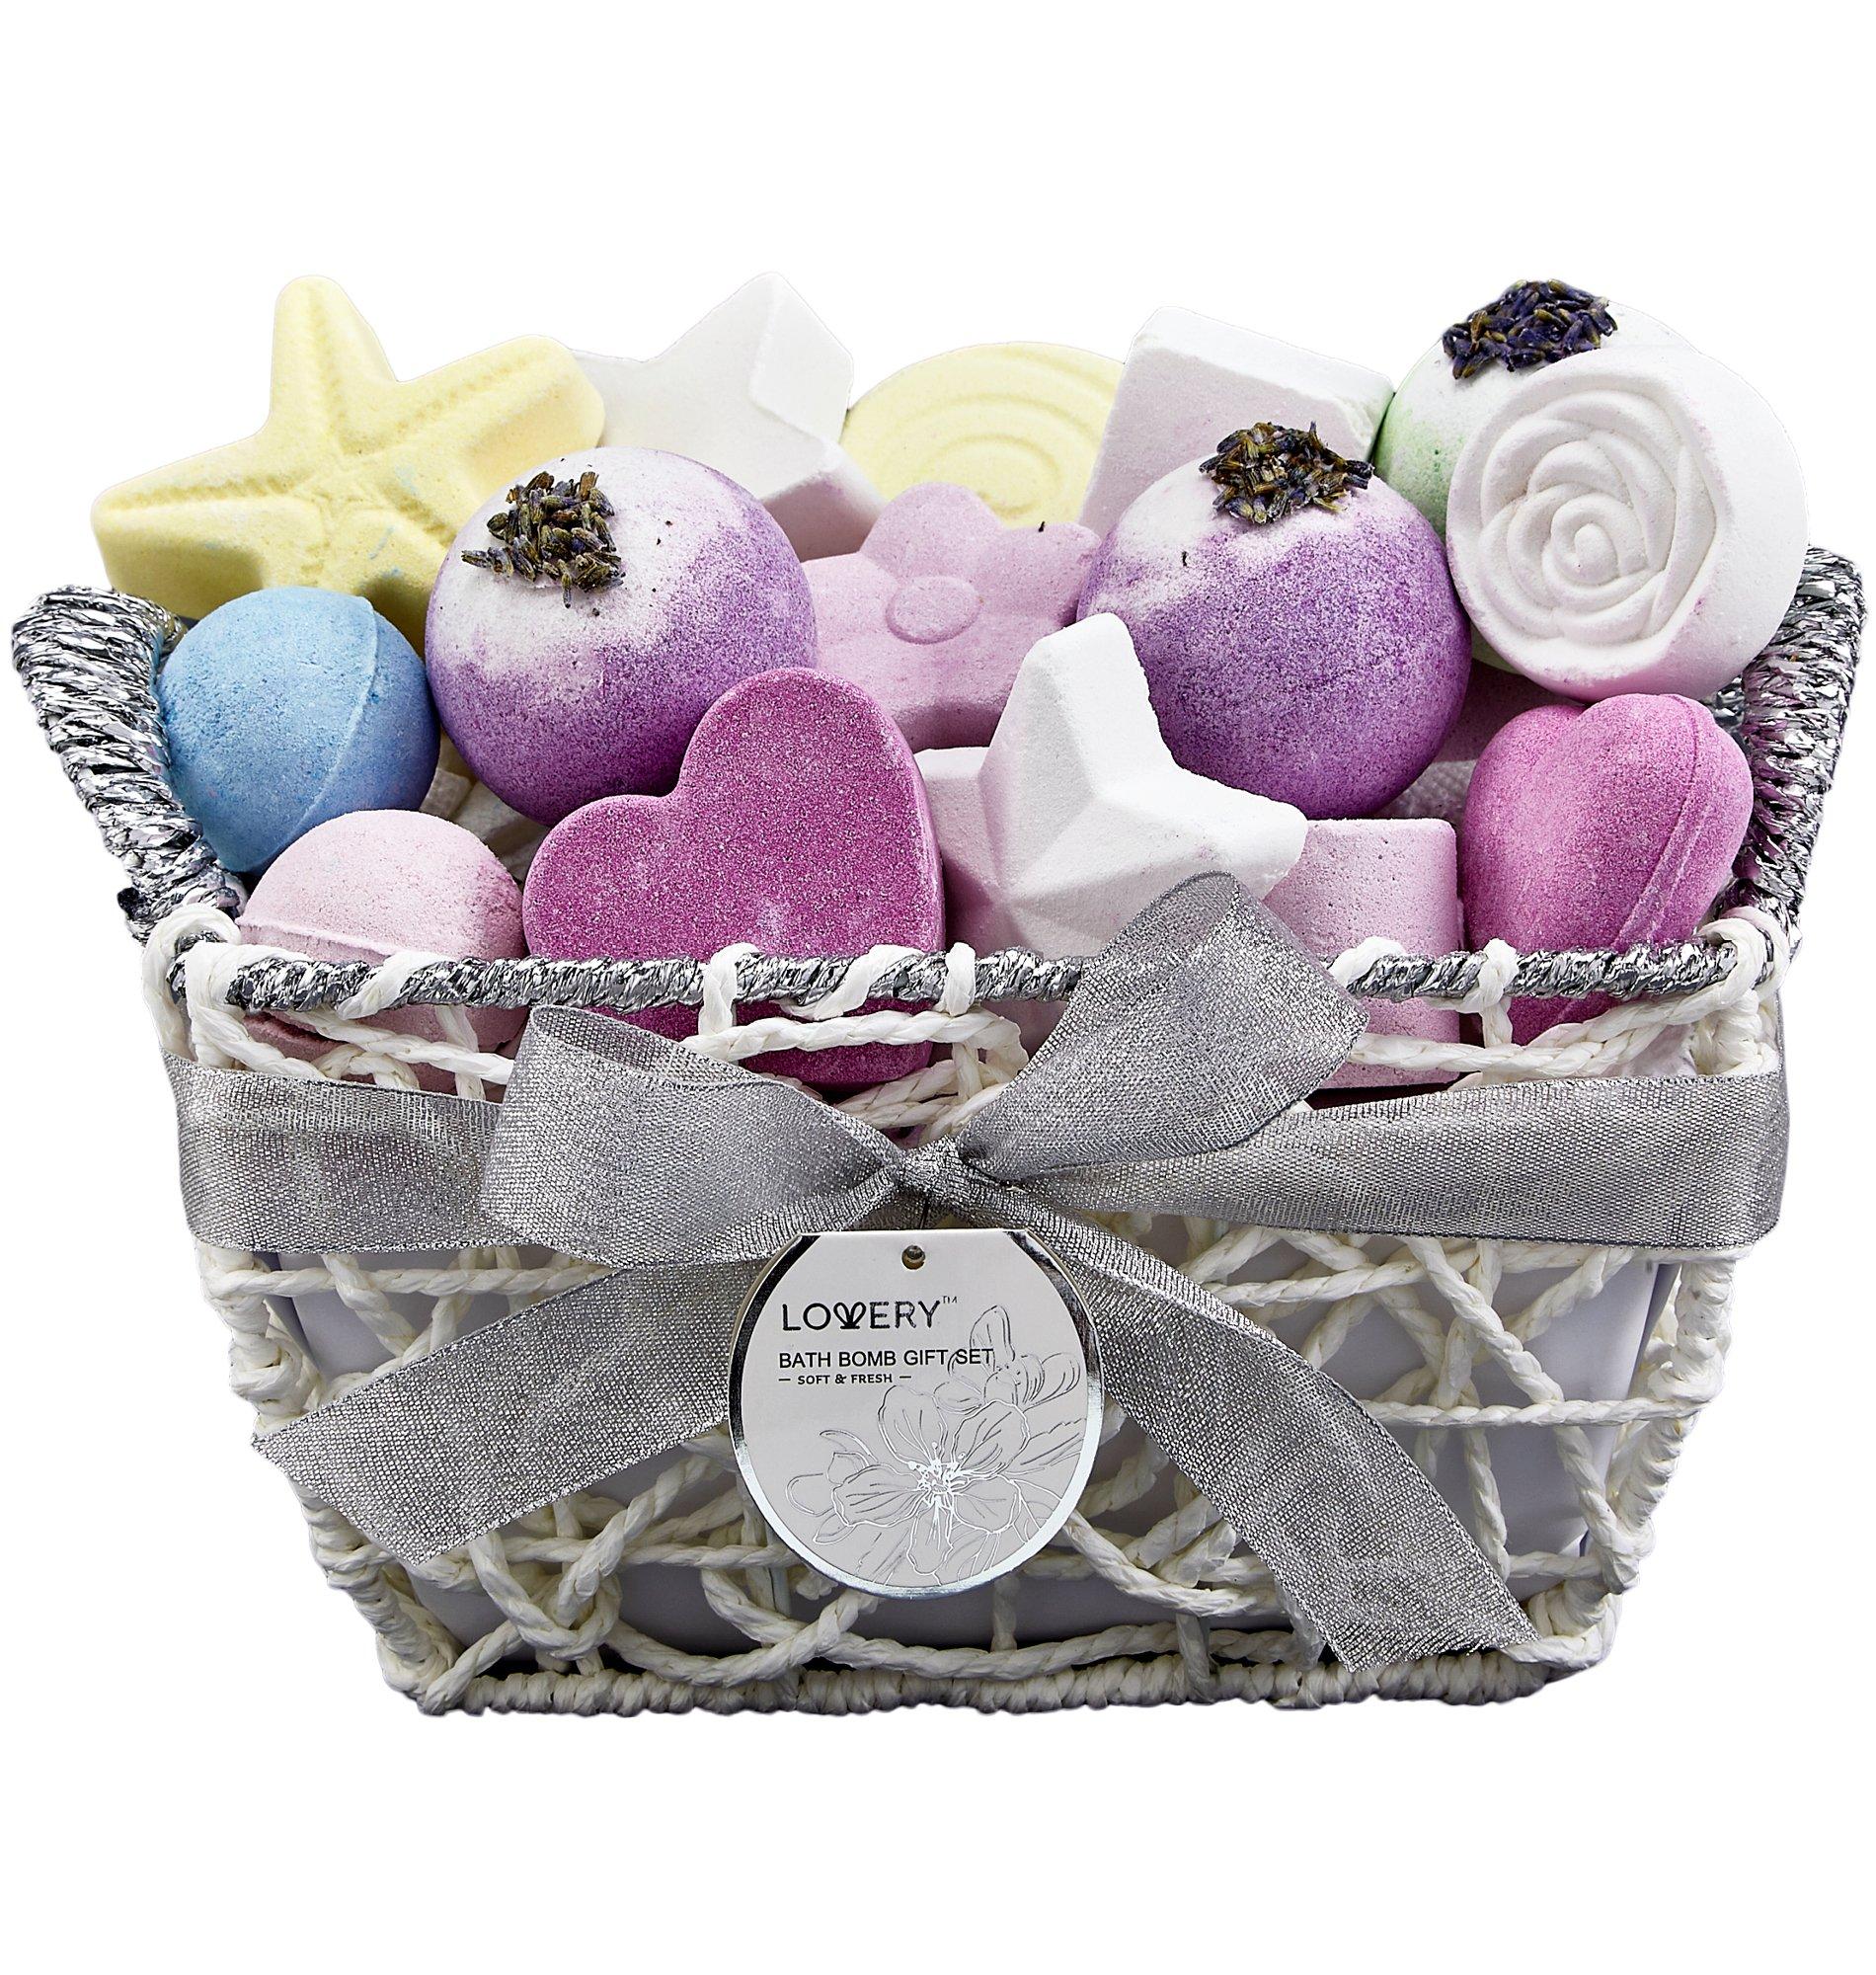 17-scented-bath-bombs-bath-bomb-collection-anniversary-gift-for-wife